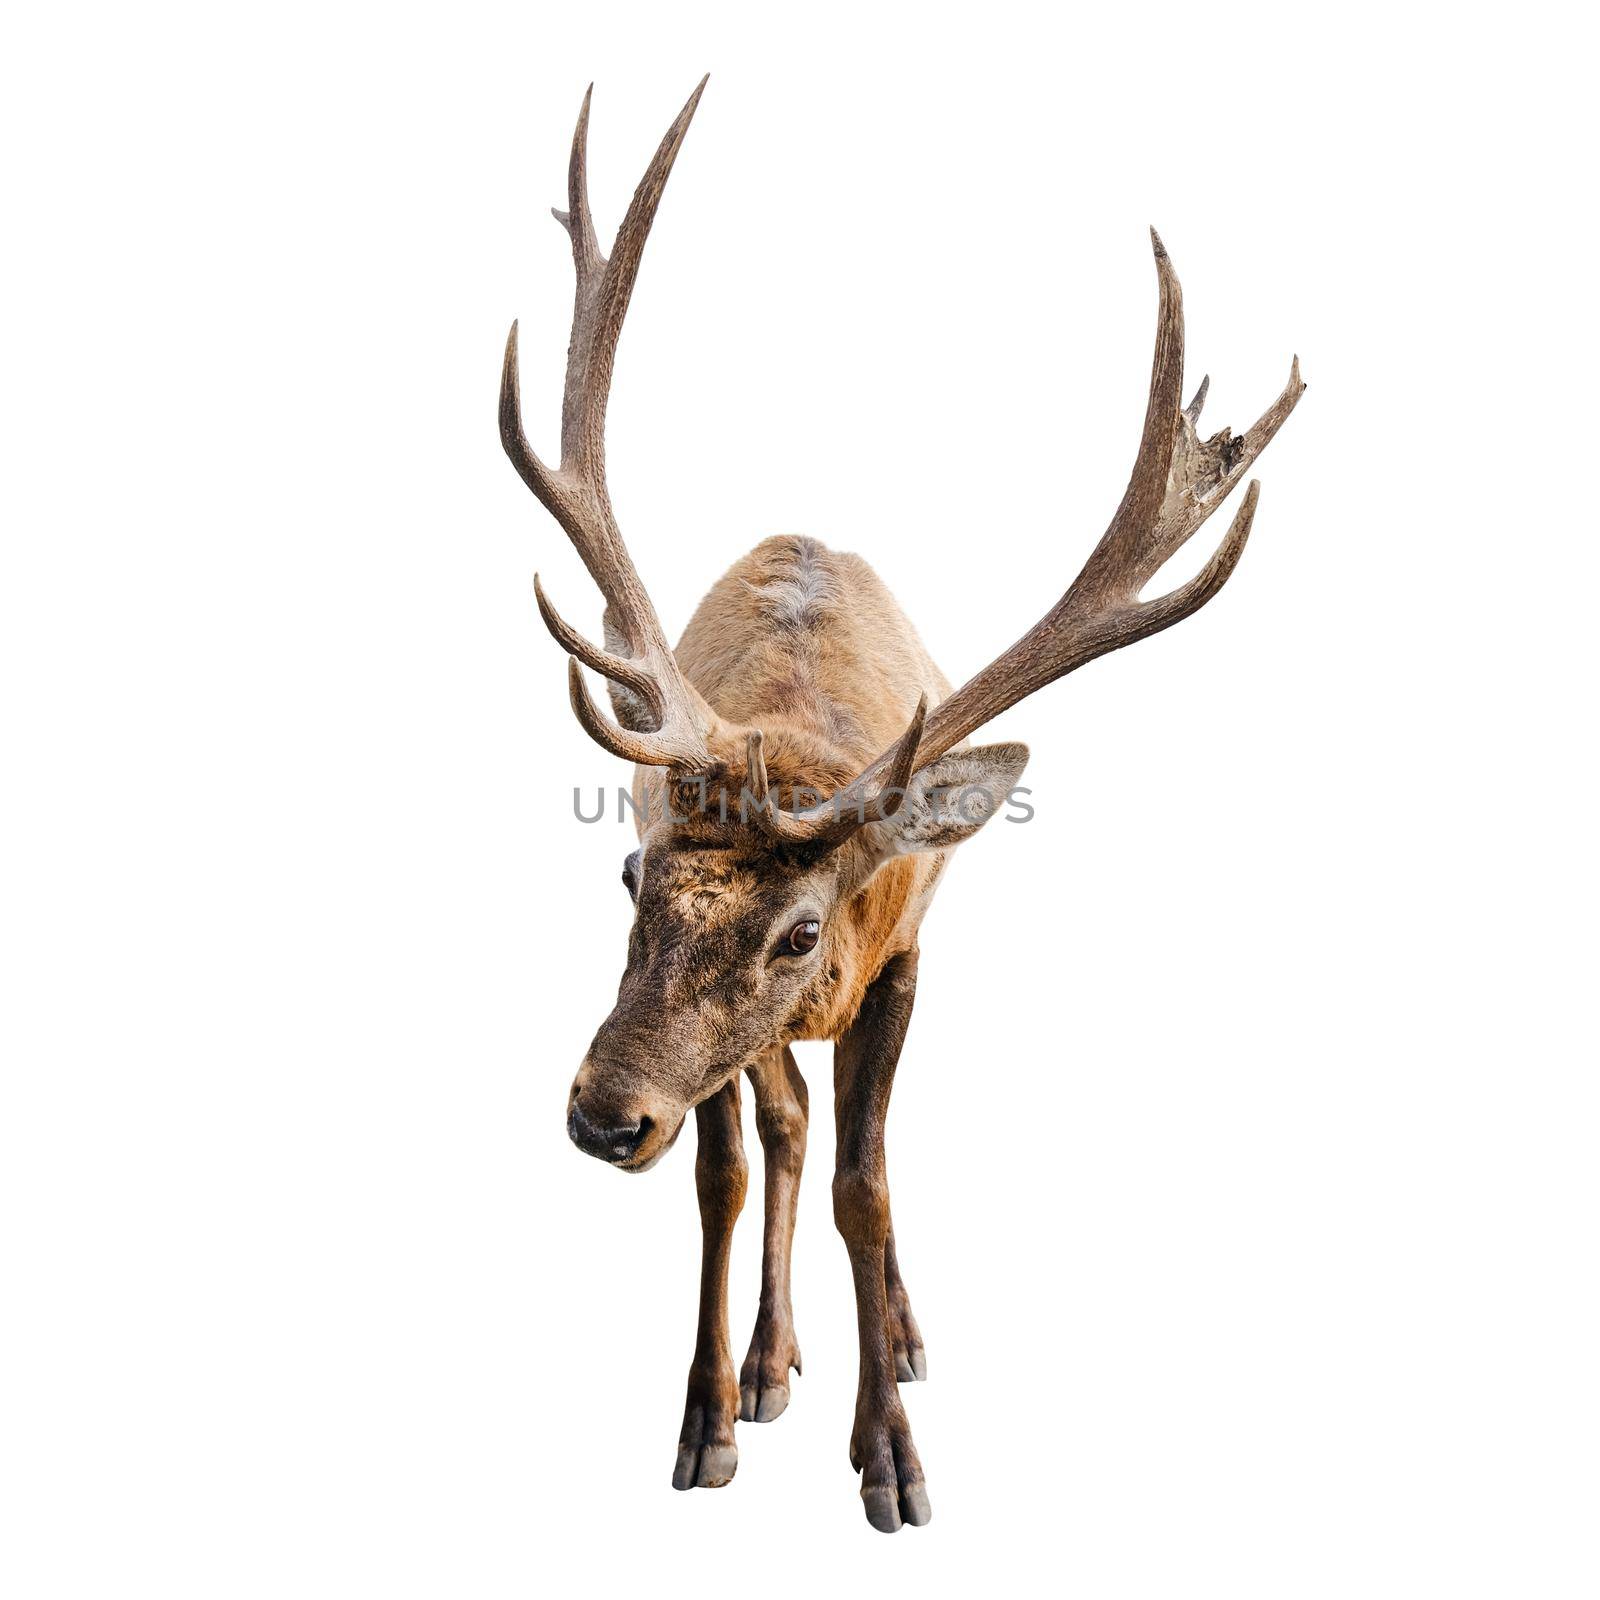 The red deer with huge horns is isolated on white background. Red deer close up.